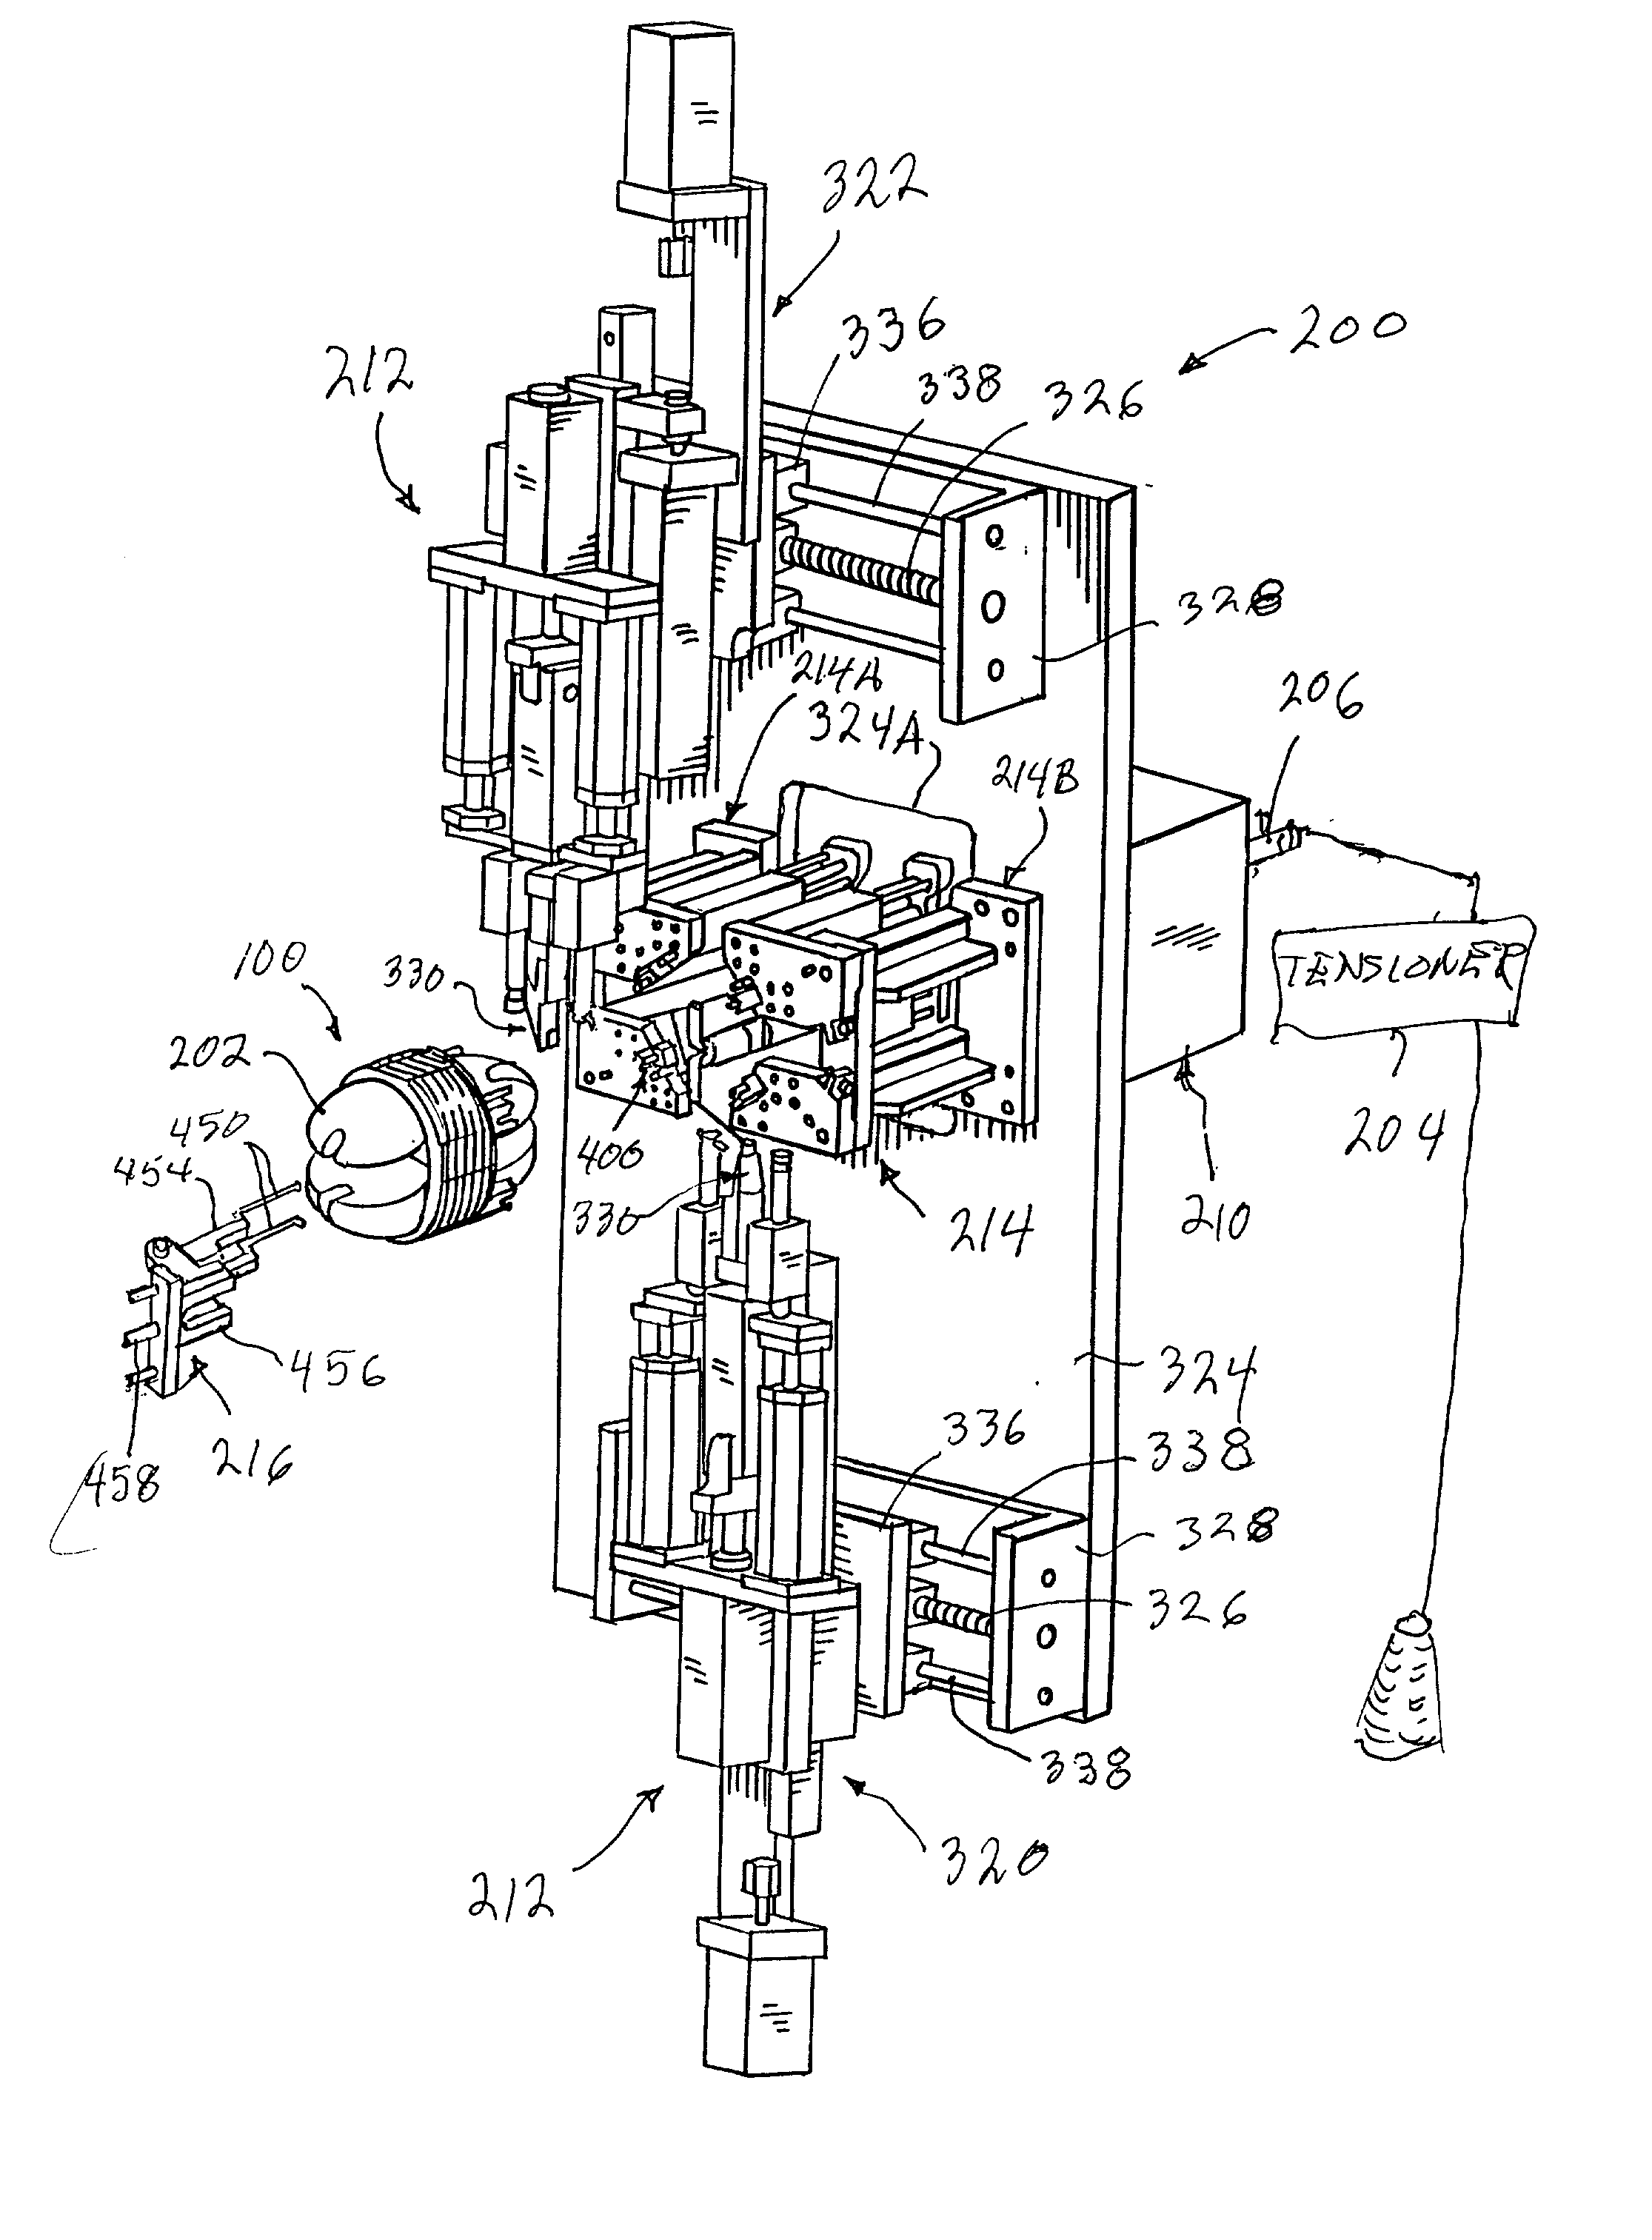 Stator winding and coil lead termination method and apparatus